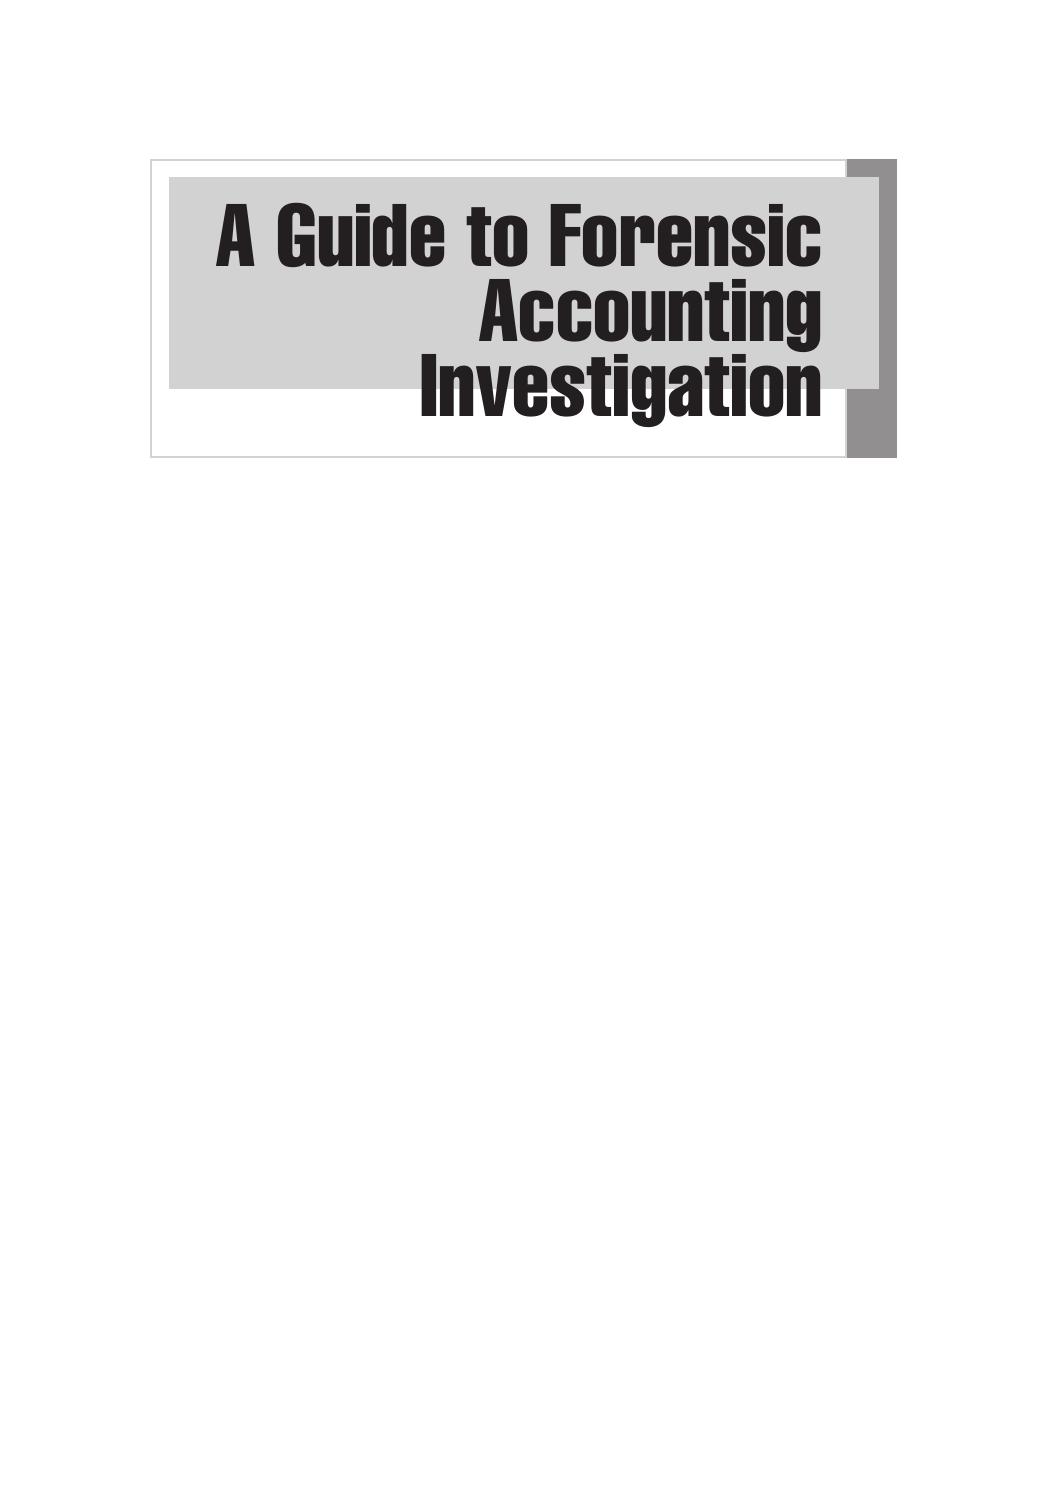 A guide to forensic accounting investigation ( PDFDrive ) 2nd ed 2011